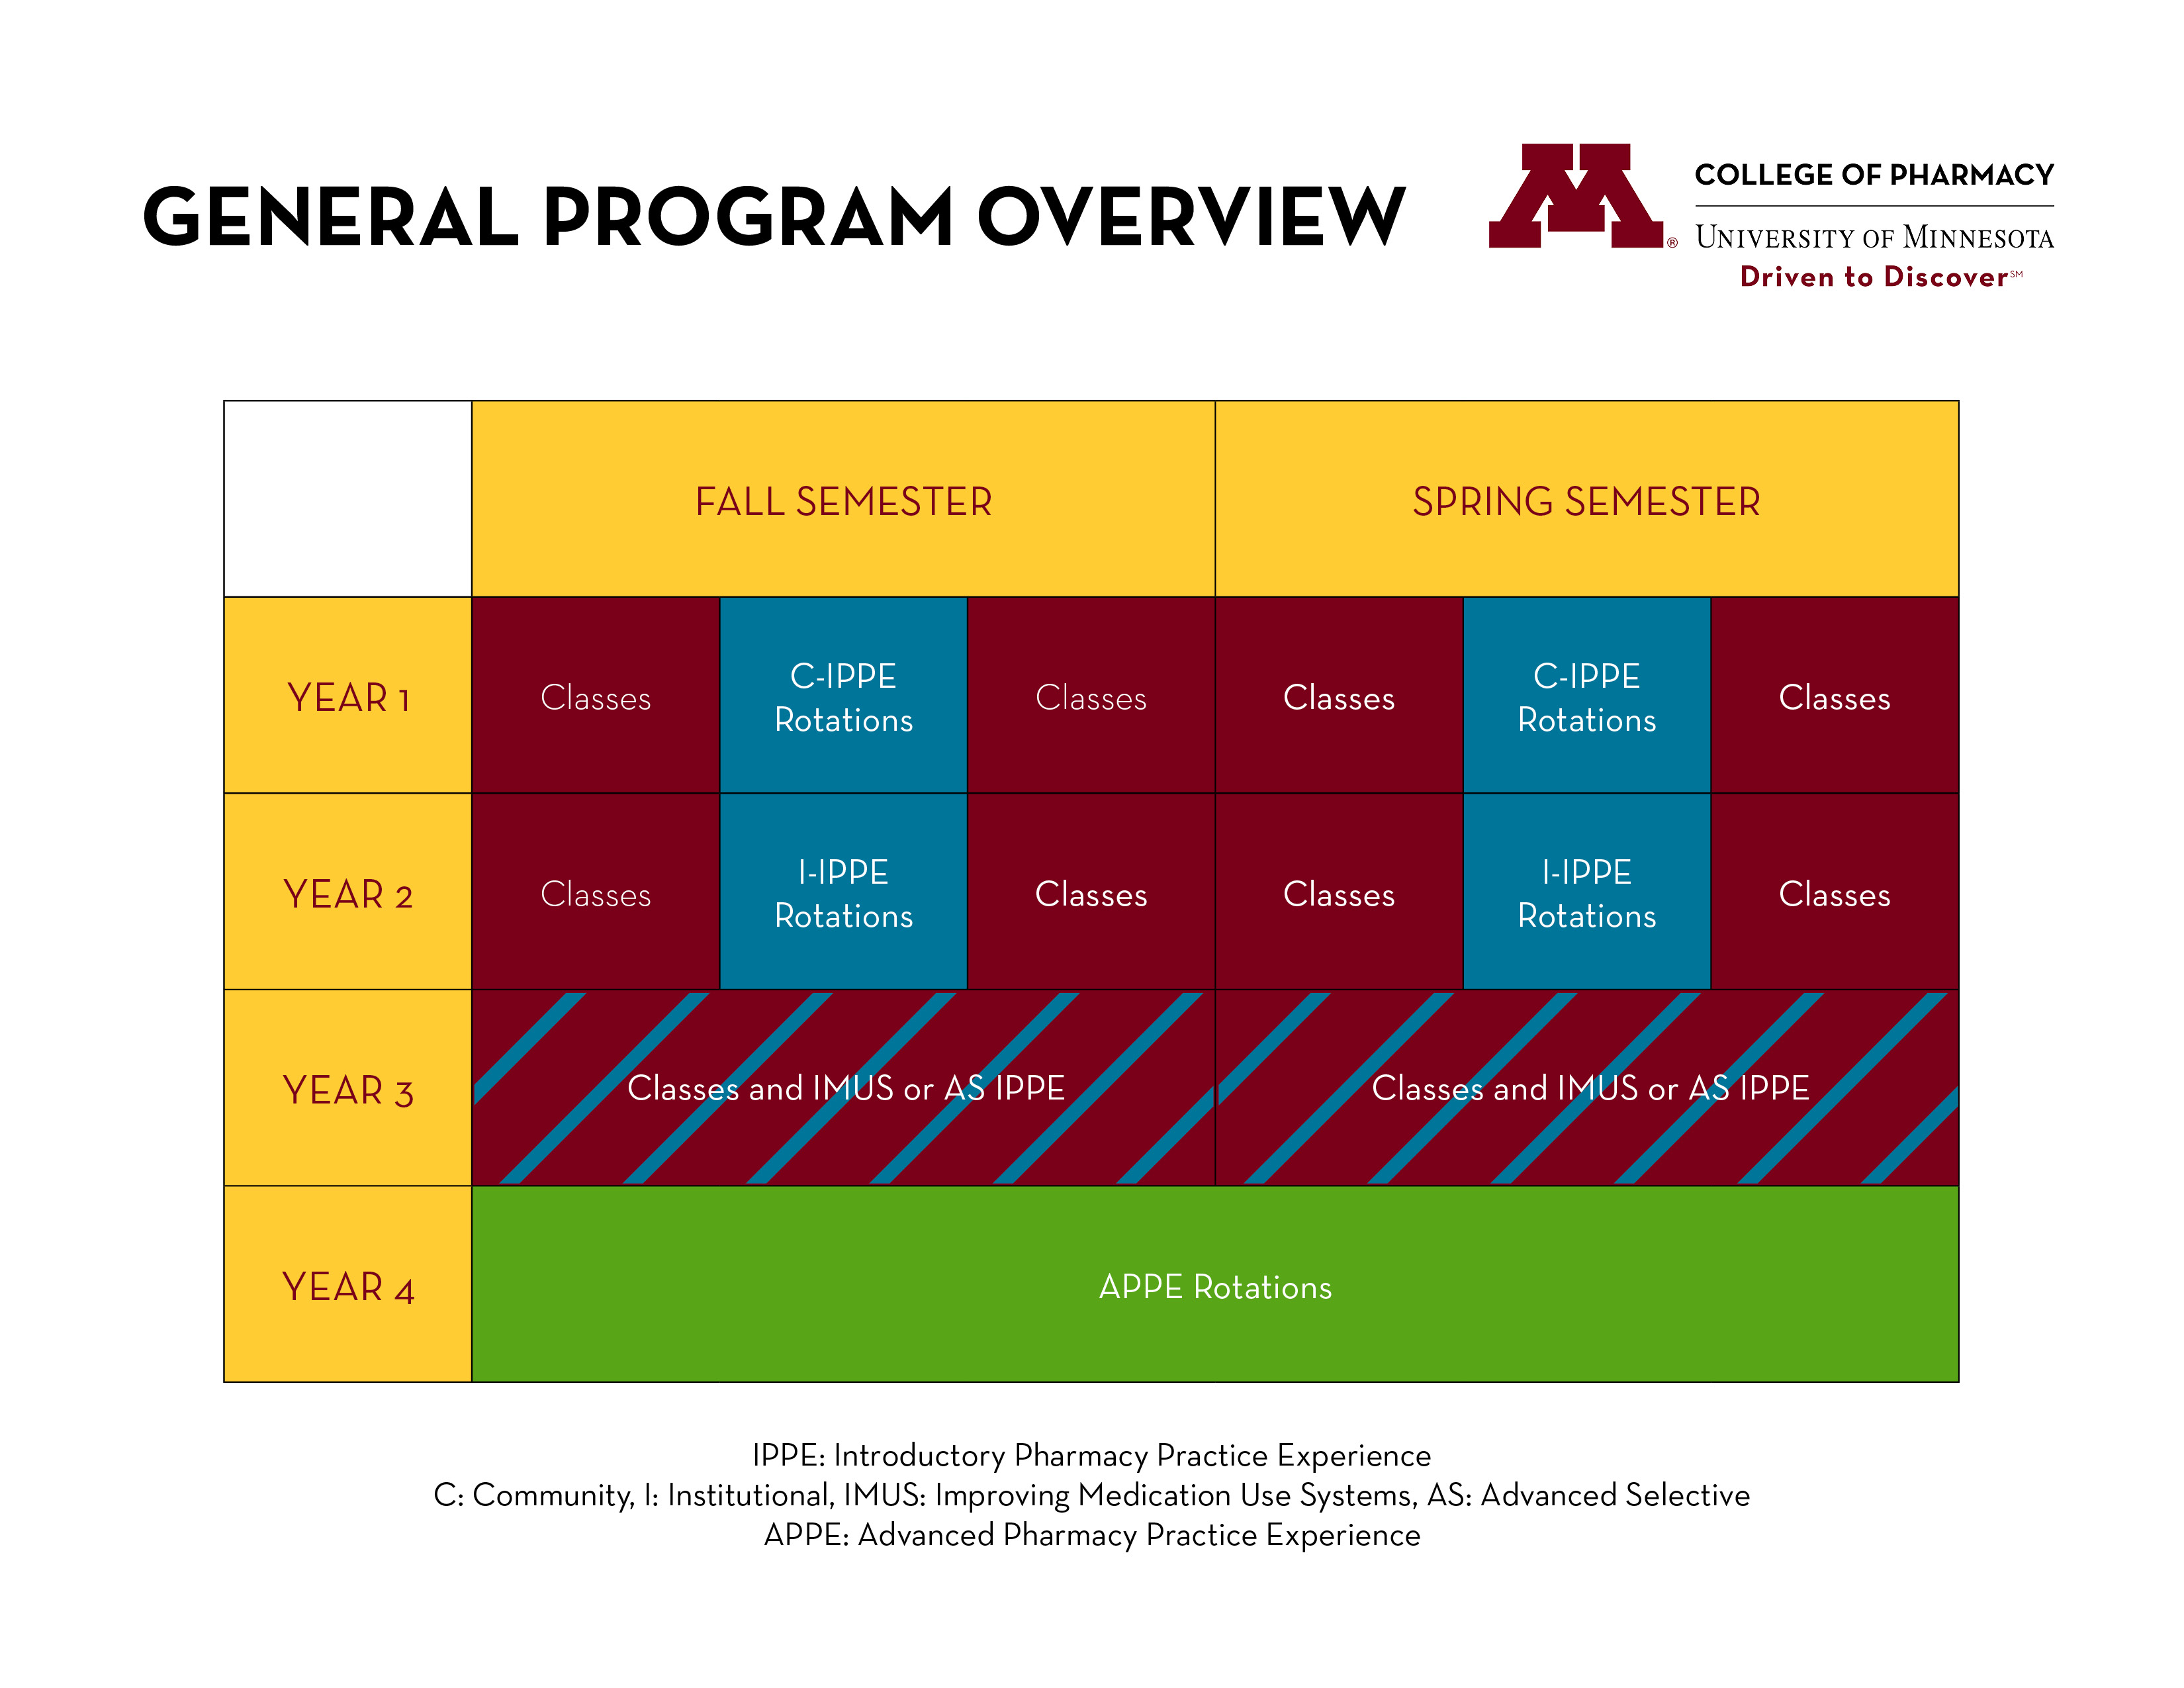 Image shows table with general timeline of when IPPEs or APPEs occur in the UMN College of Pharmacy curriculum. 